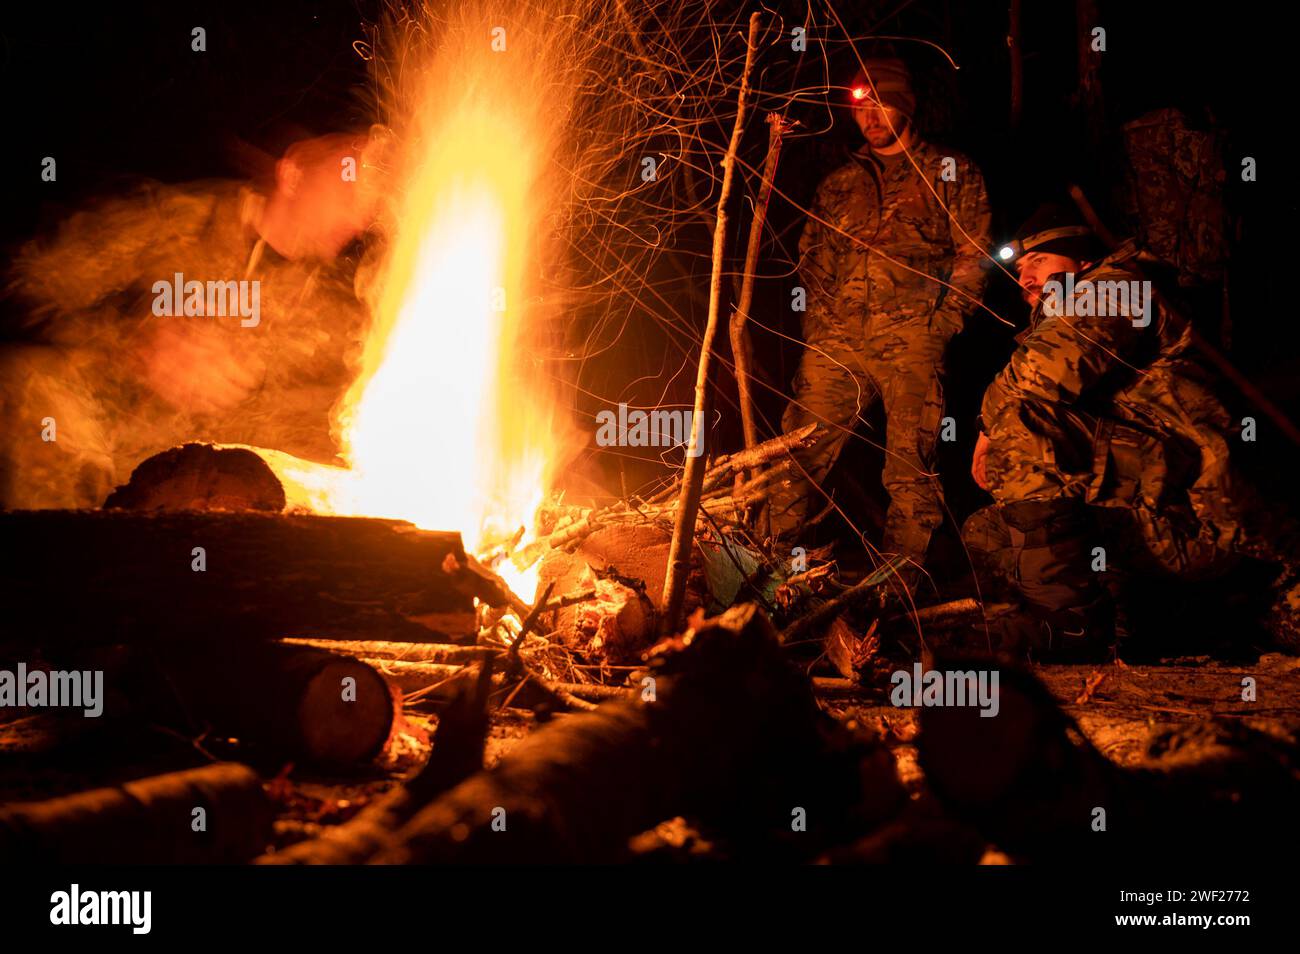 Little Falls, Minnesota, USA. 24th Jan, 2024. U.S. Navy Explosive Ordnance Disposal (EOD) Technicians assigned to Explosive Ordnance Disposal Group (EODGRU) 2 tend a campfire during arctic survivability training as part of Snow Crab Exercise 24-1. SNOWCRABEX is an annual exercise designed to test and evaluate U.S. Navy EOD and Navy Diver's capabilities and equipment in a simulated arctic environment and improve combat effectiveness. Navy EOD and Navy Divers are part of the Navy Expeditionary Combat Force (NECF), enabling the U.S. Navy Fleet by clearing and protecting the battlespace. (Cr Stock Photo